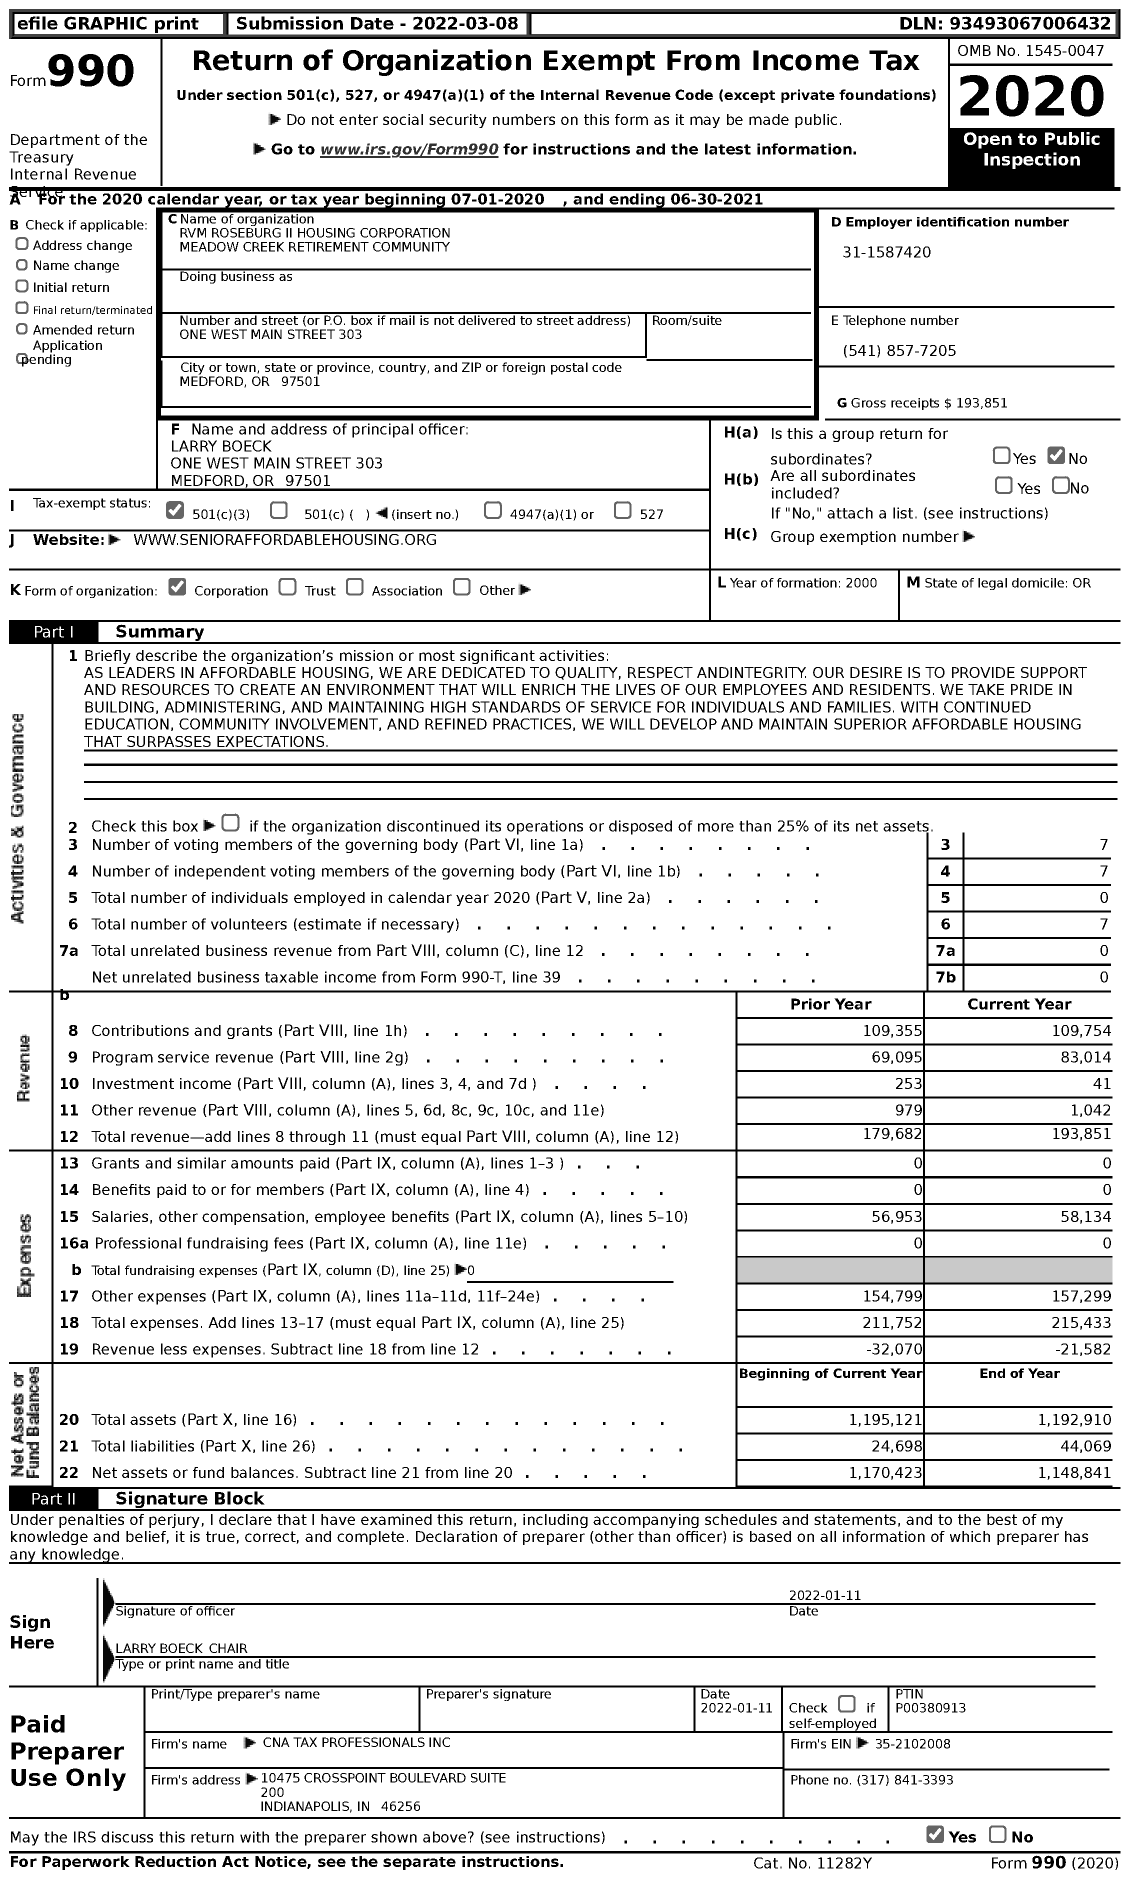 Image of first page of 2020 Form 990 for RVM Roseburg II Housing Corporation Meadow Creek Retirement Community